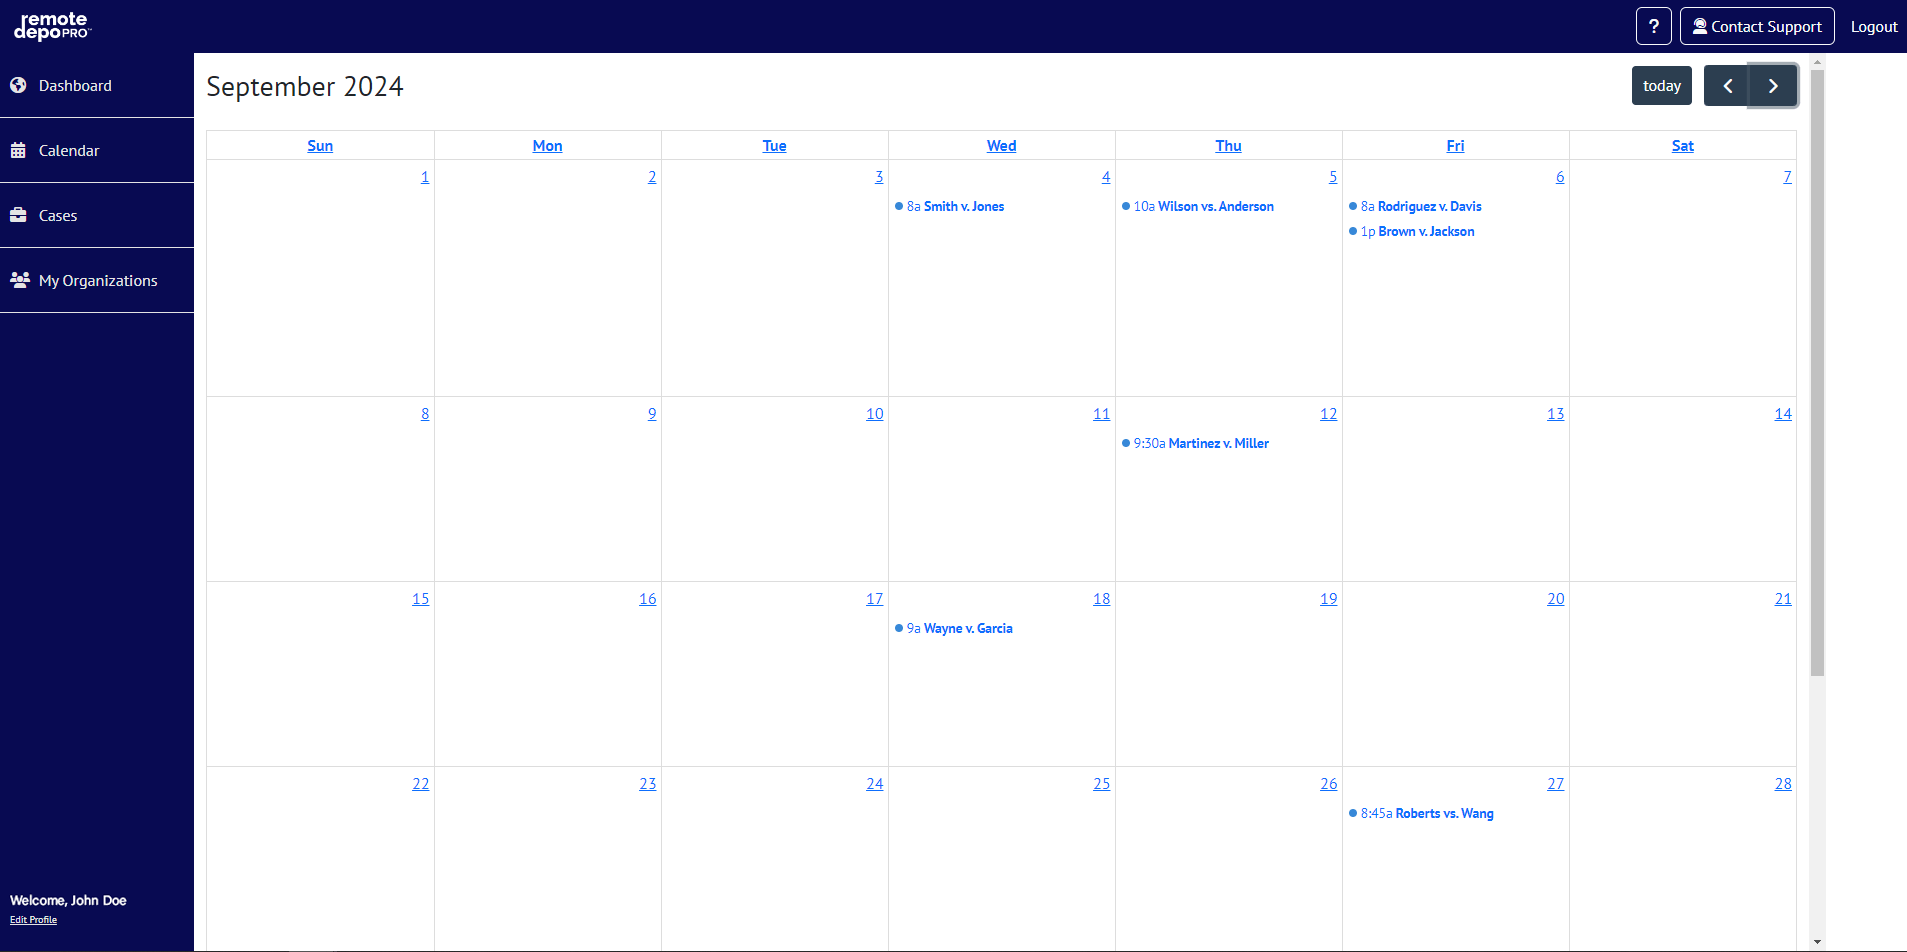 Calendar View: Monthly view of upcoming and past proceedings